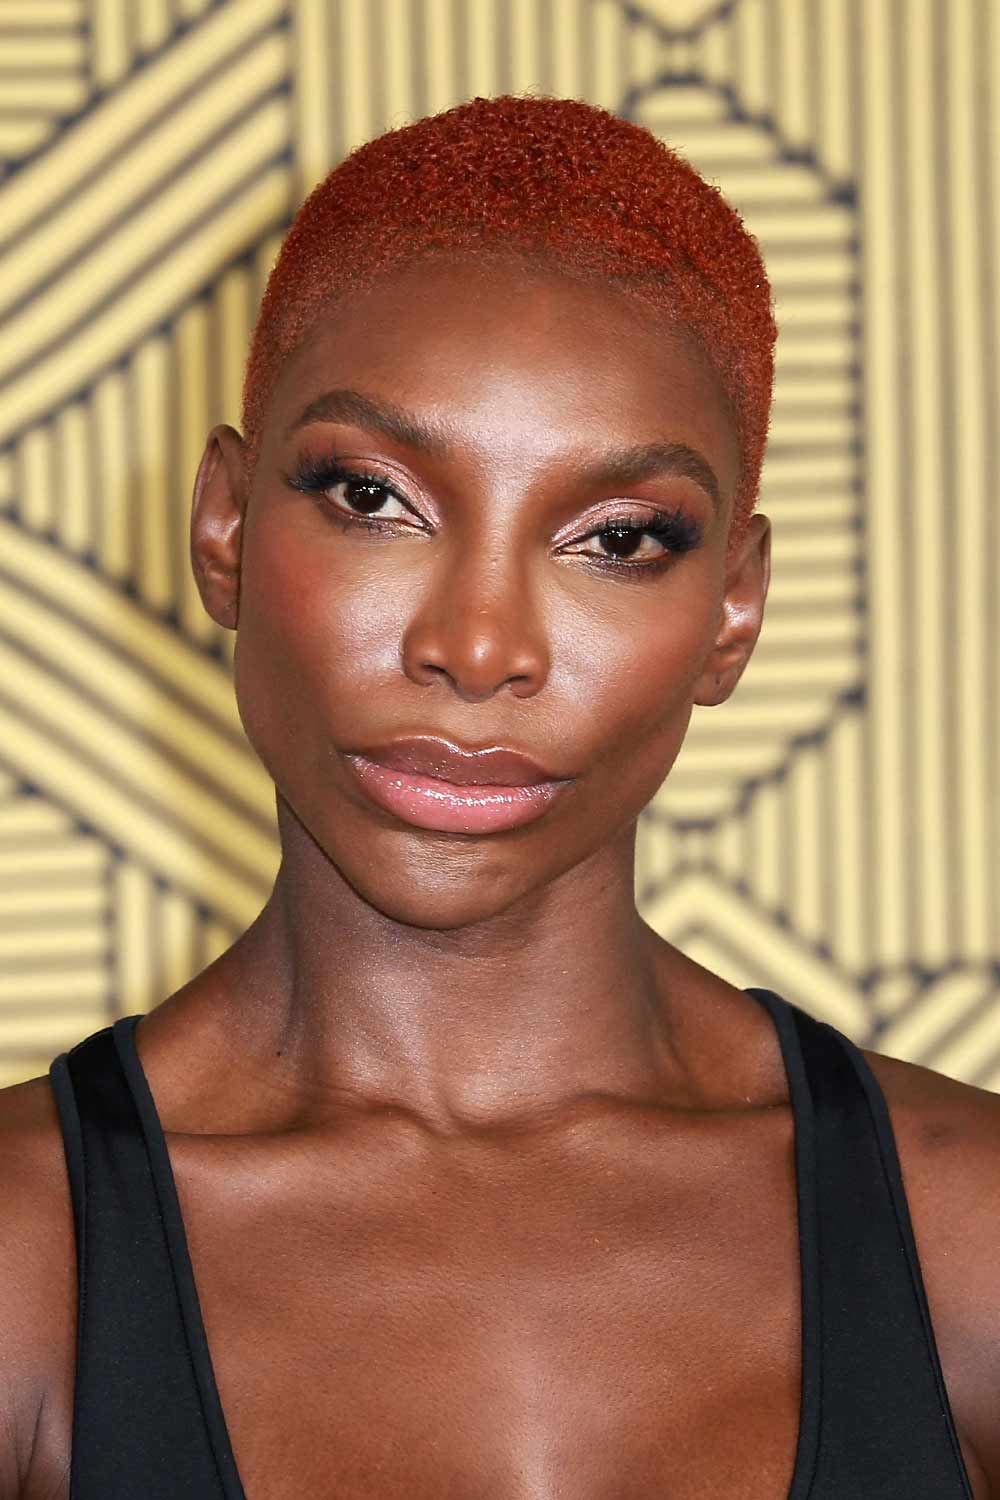 Michaela Coel with a Red Buzz Cut